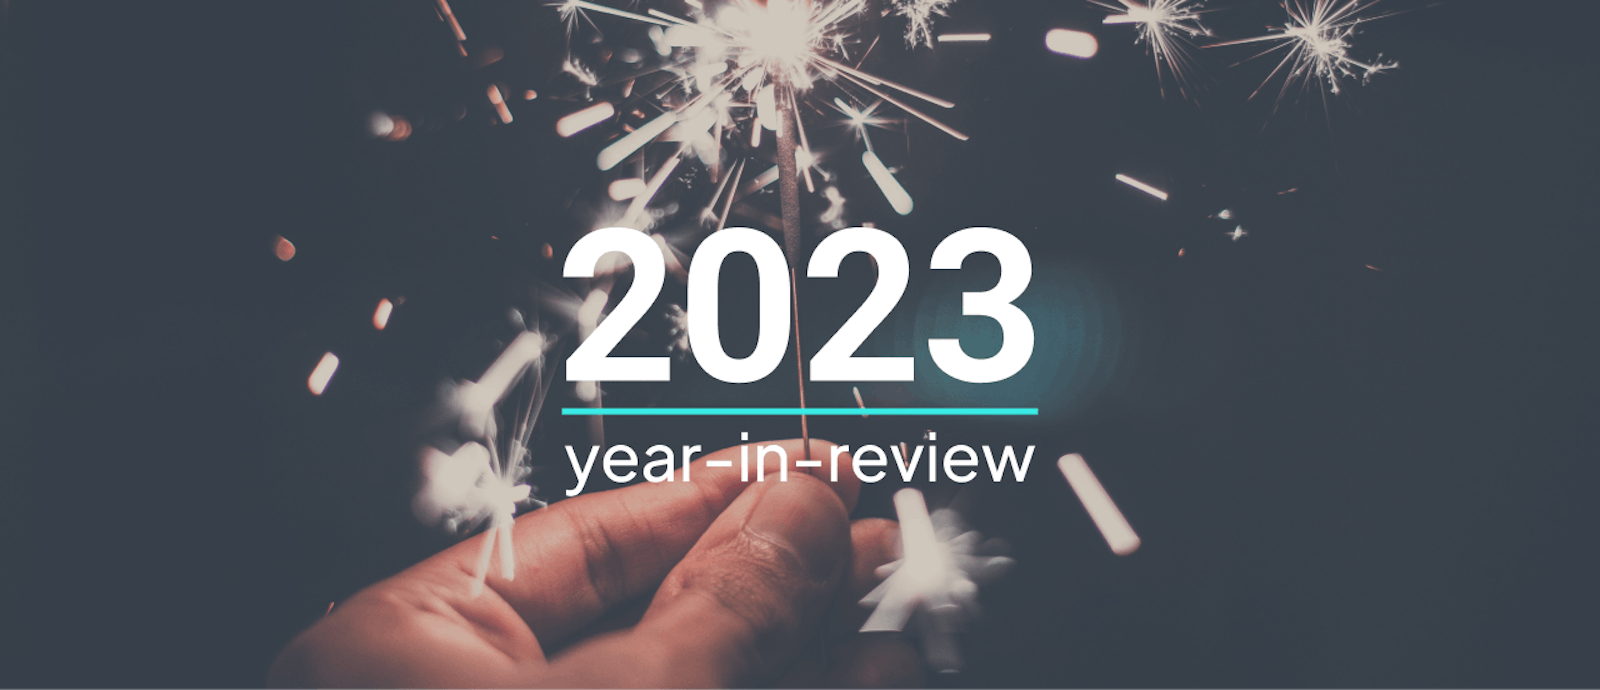 2023 year-in-review